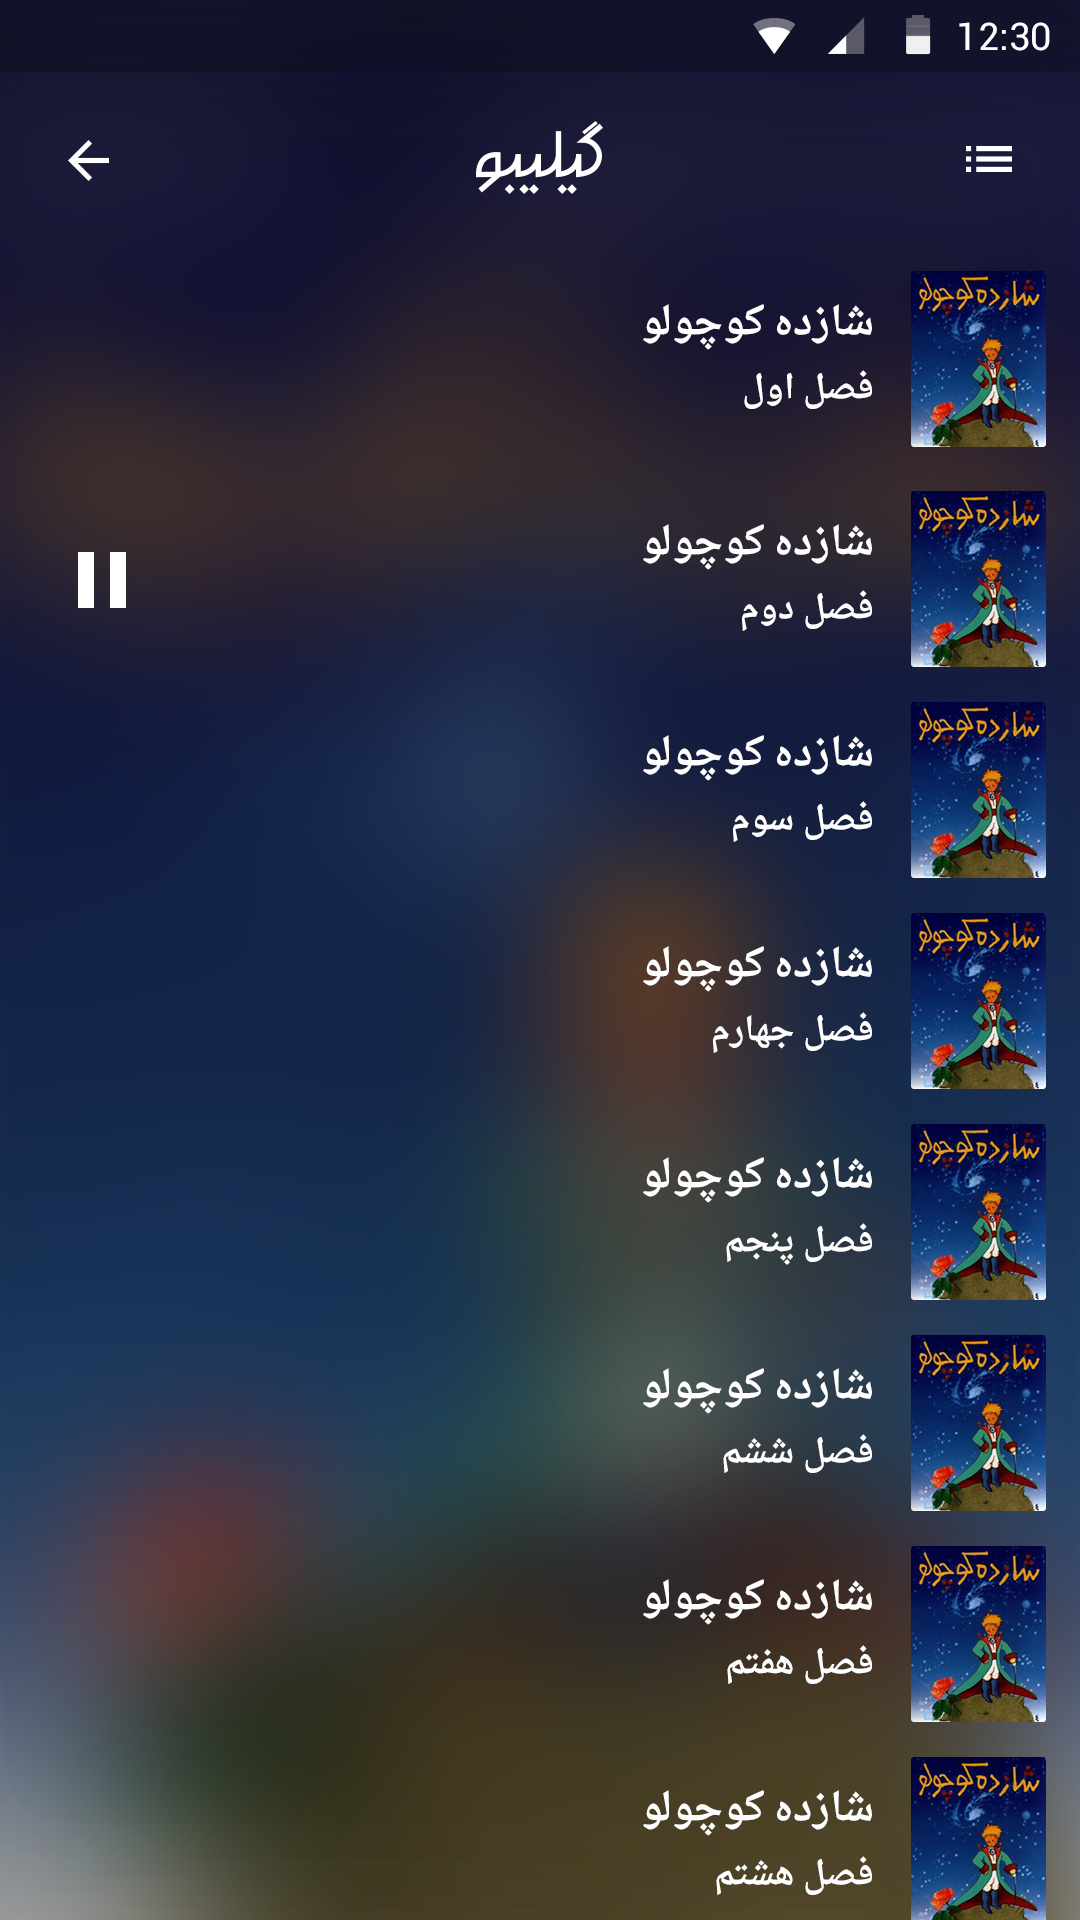 Gilibo for Android by Pouya Saadeghi - /projects/vubf2n6XG7wHxwjUm2ZSeVUytvkD7jFF.png